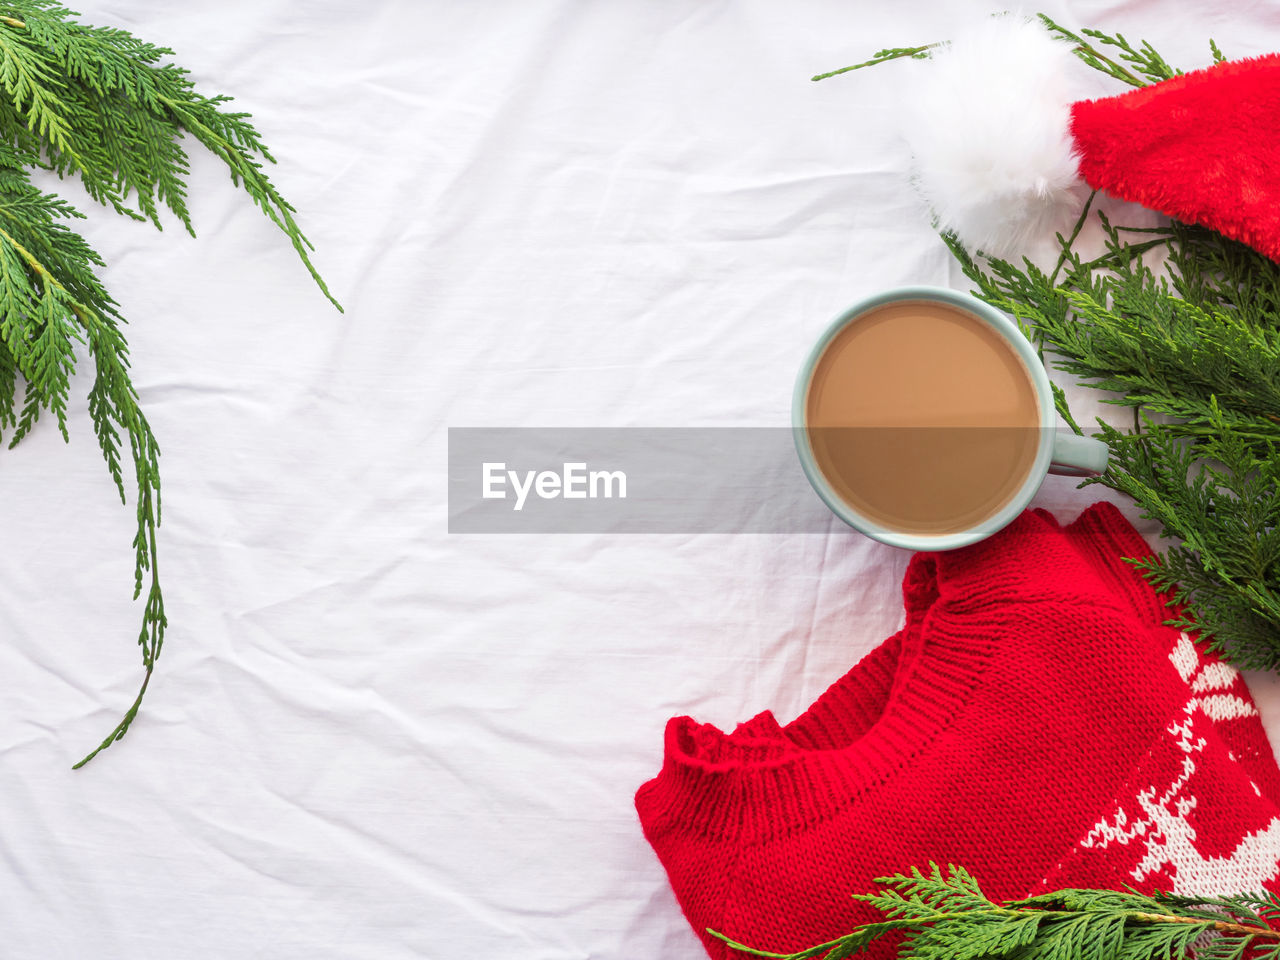 Winter cozy coffee mug, red sweater on background with branches